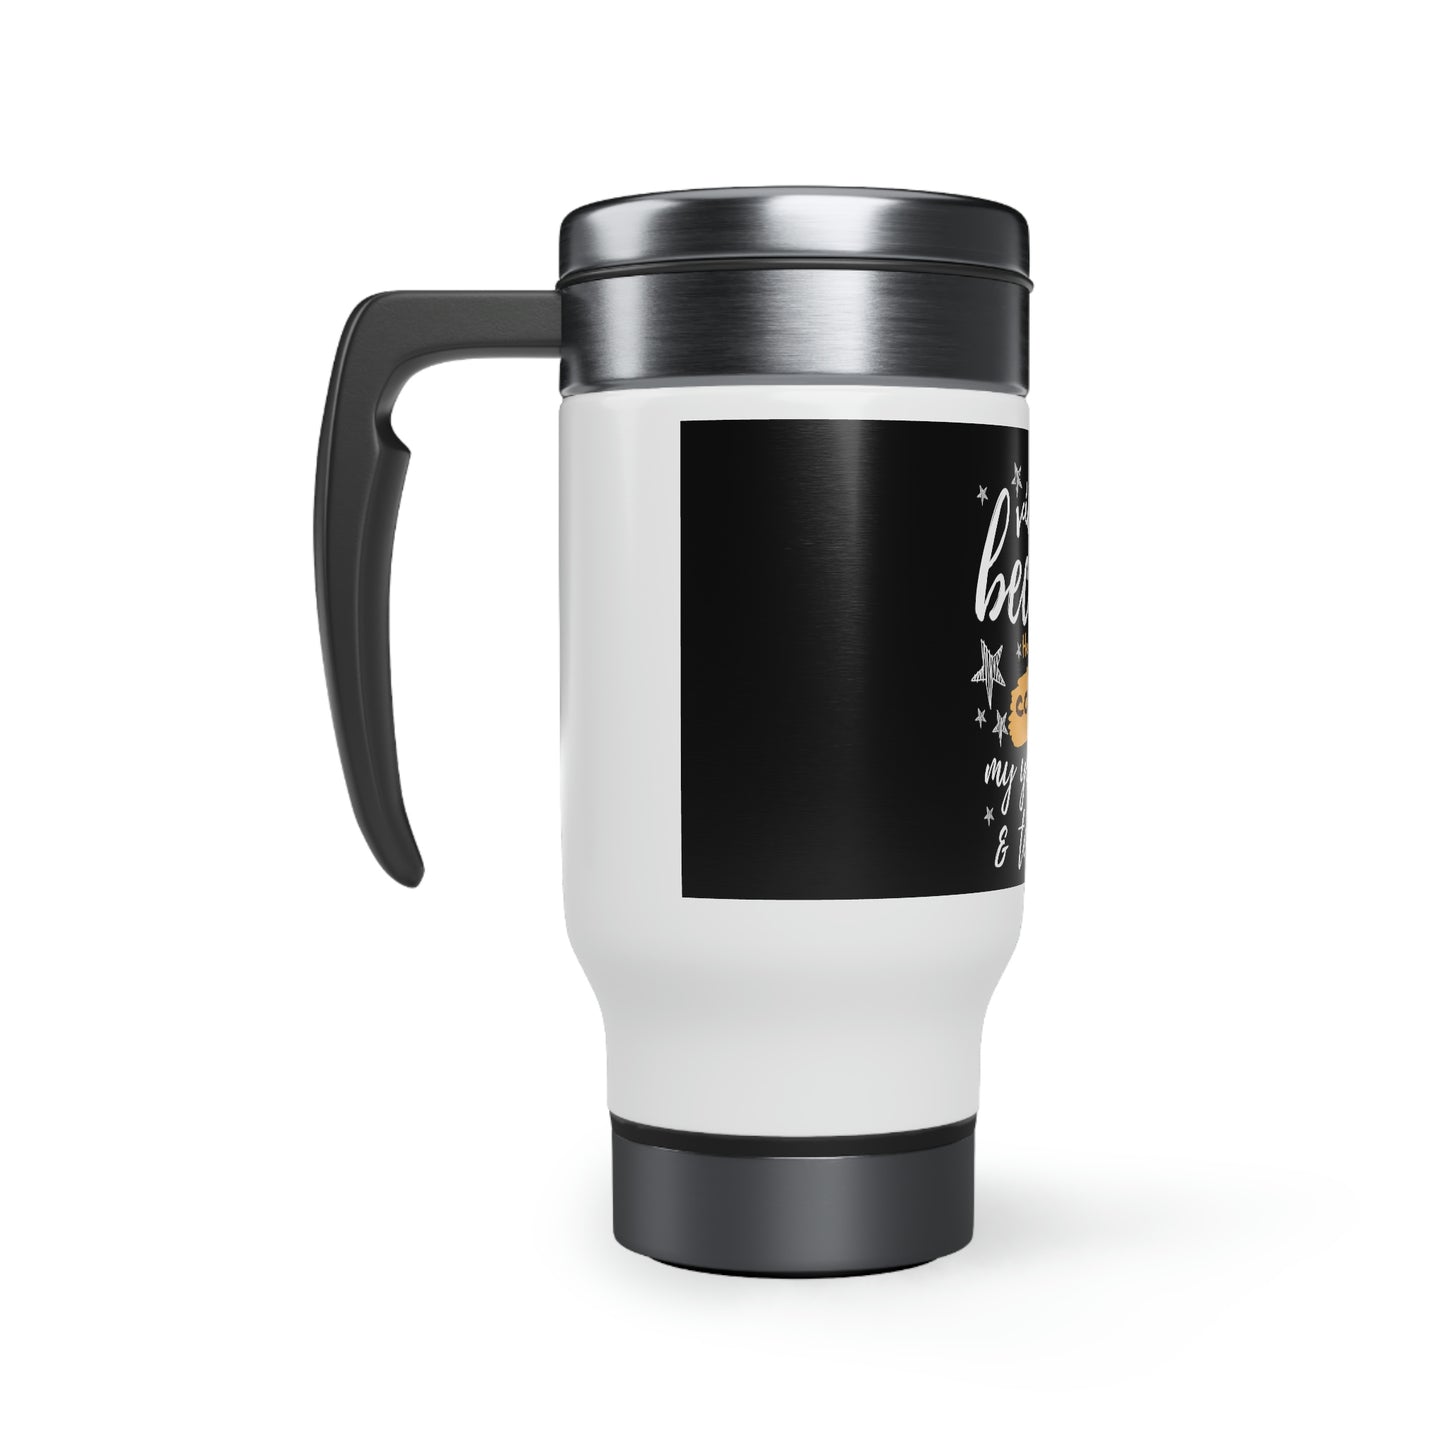 Victorious Today Because He Already Conquered My Yesterdays and Tomorrows Stainless Steel Travel Mug with Handle, 14oz